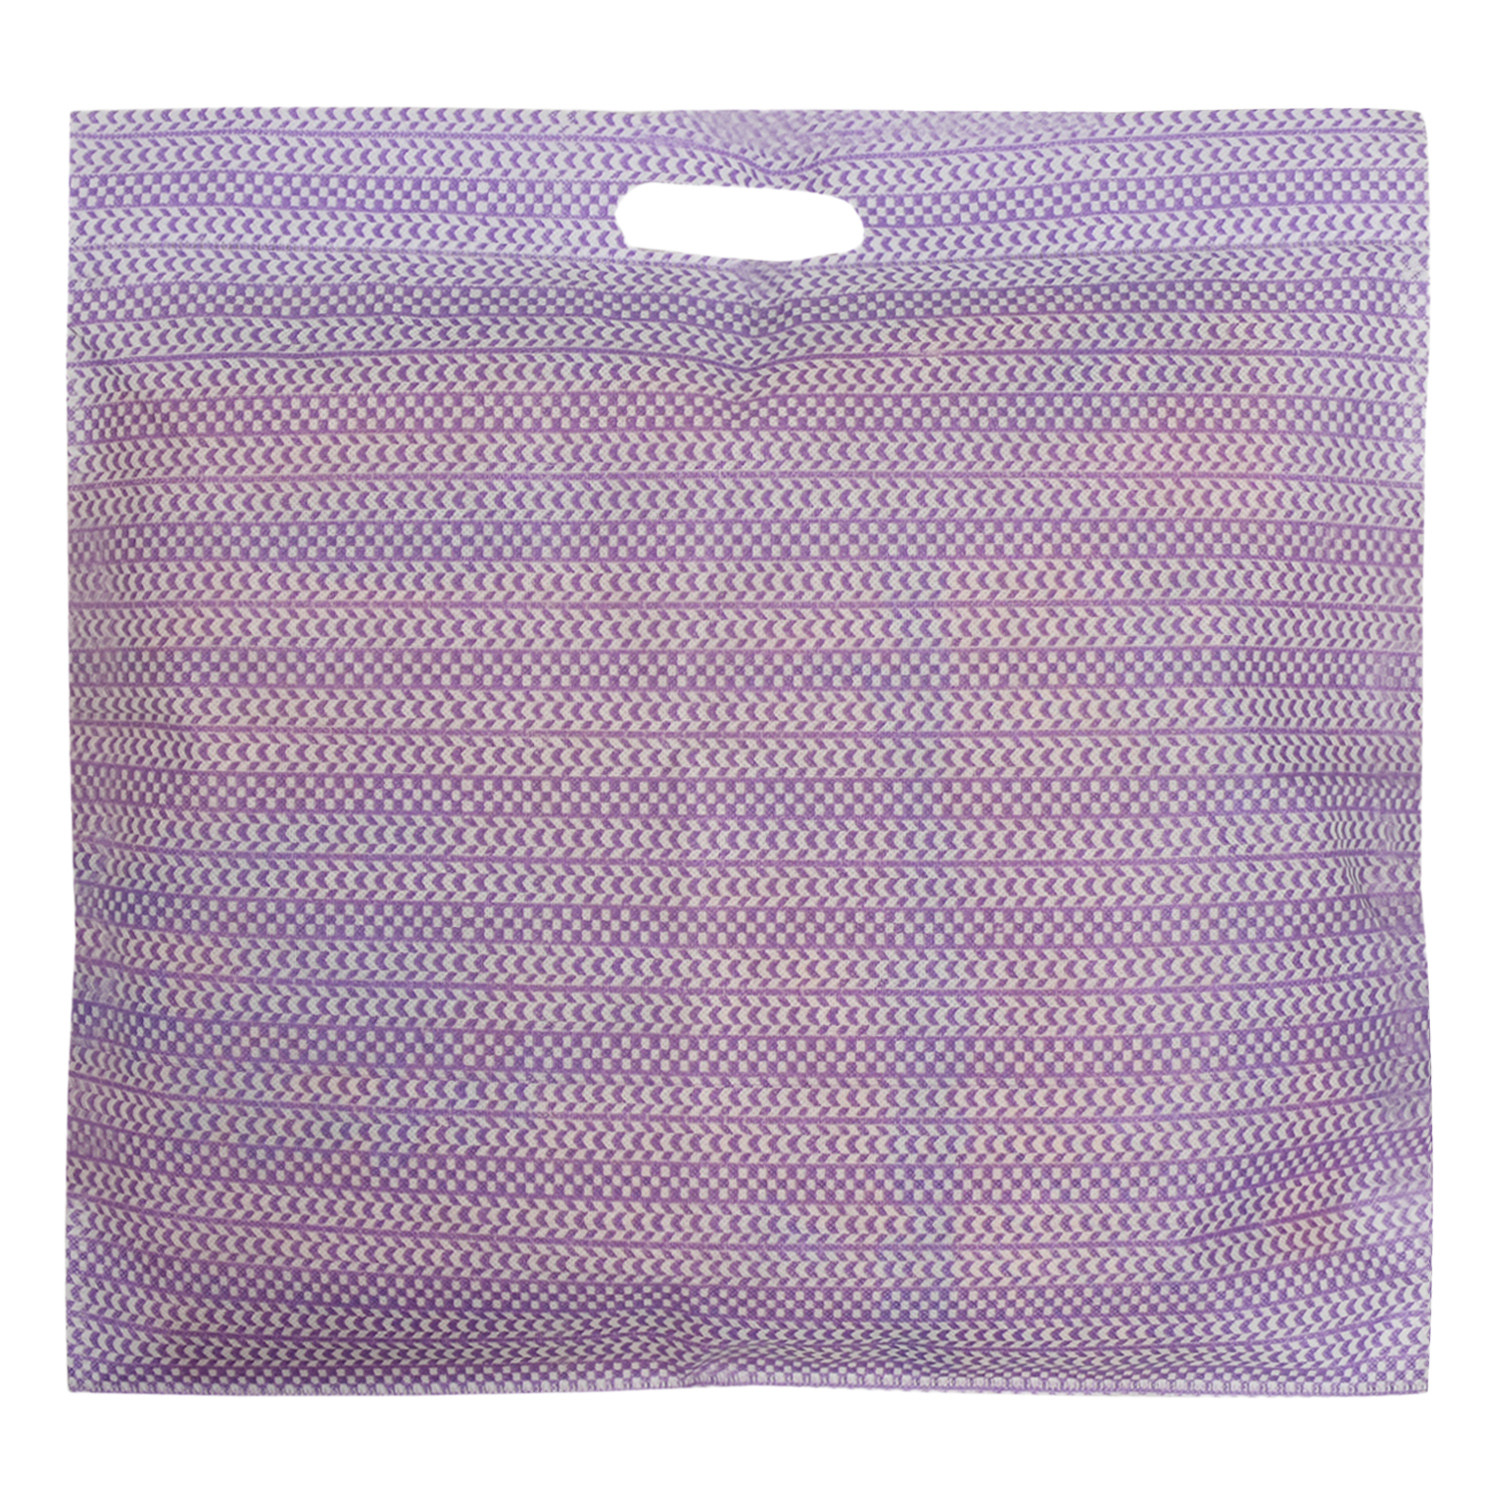 Kuber Industries Non-Woven Single Saree Covers With Transparent Window With Handle(Purple)